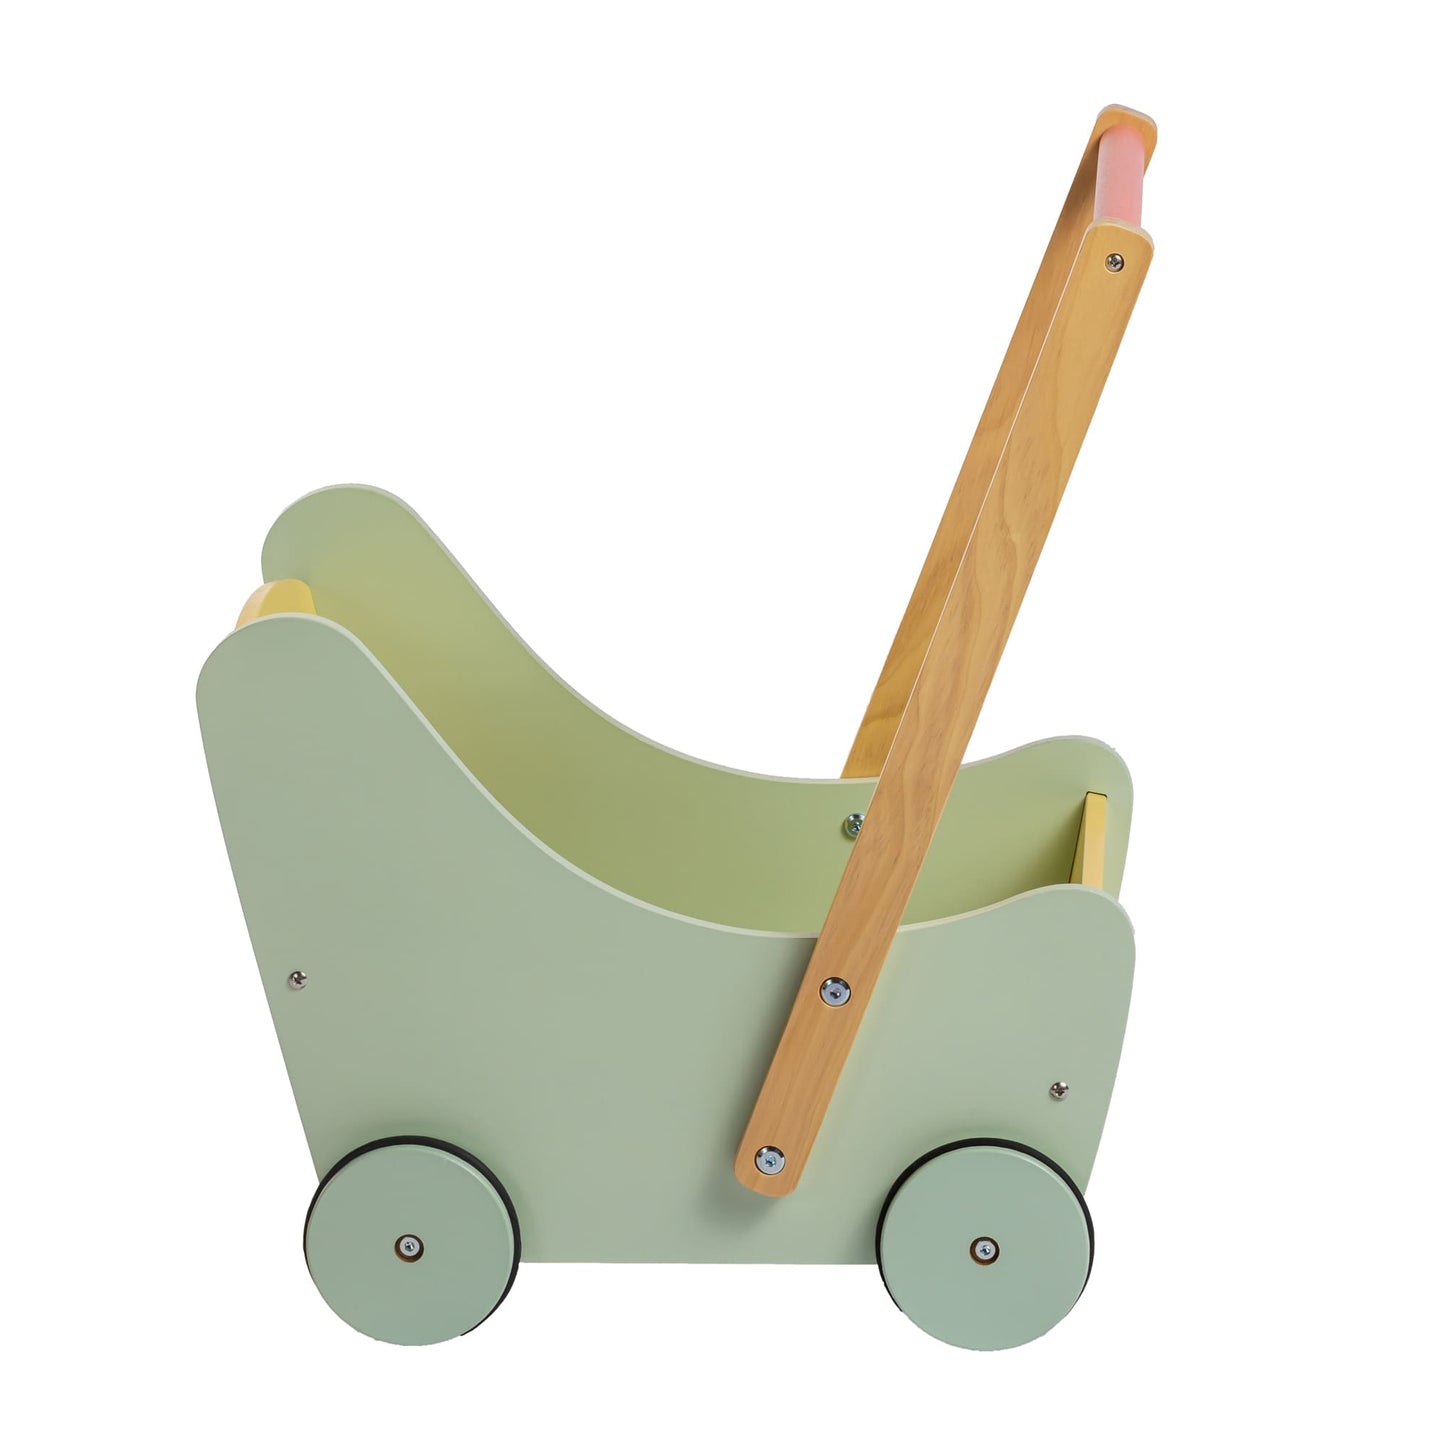 Toy cart with wheels